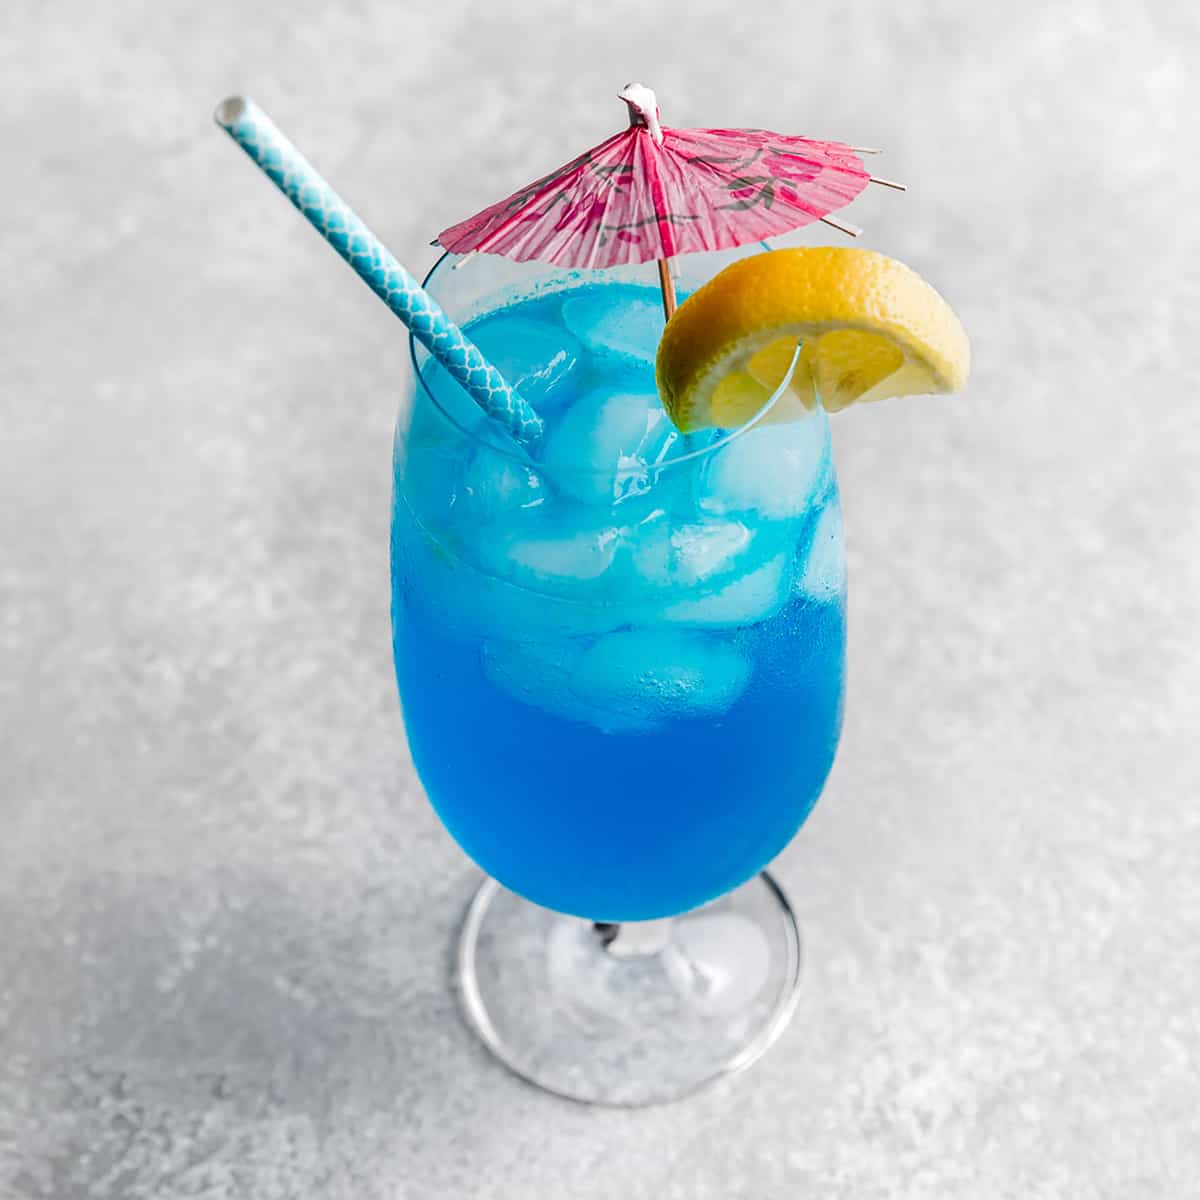 A Blue Lagoon Mocktail in a large glass cup with a pink umbrella and lemon slice on the rim.